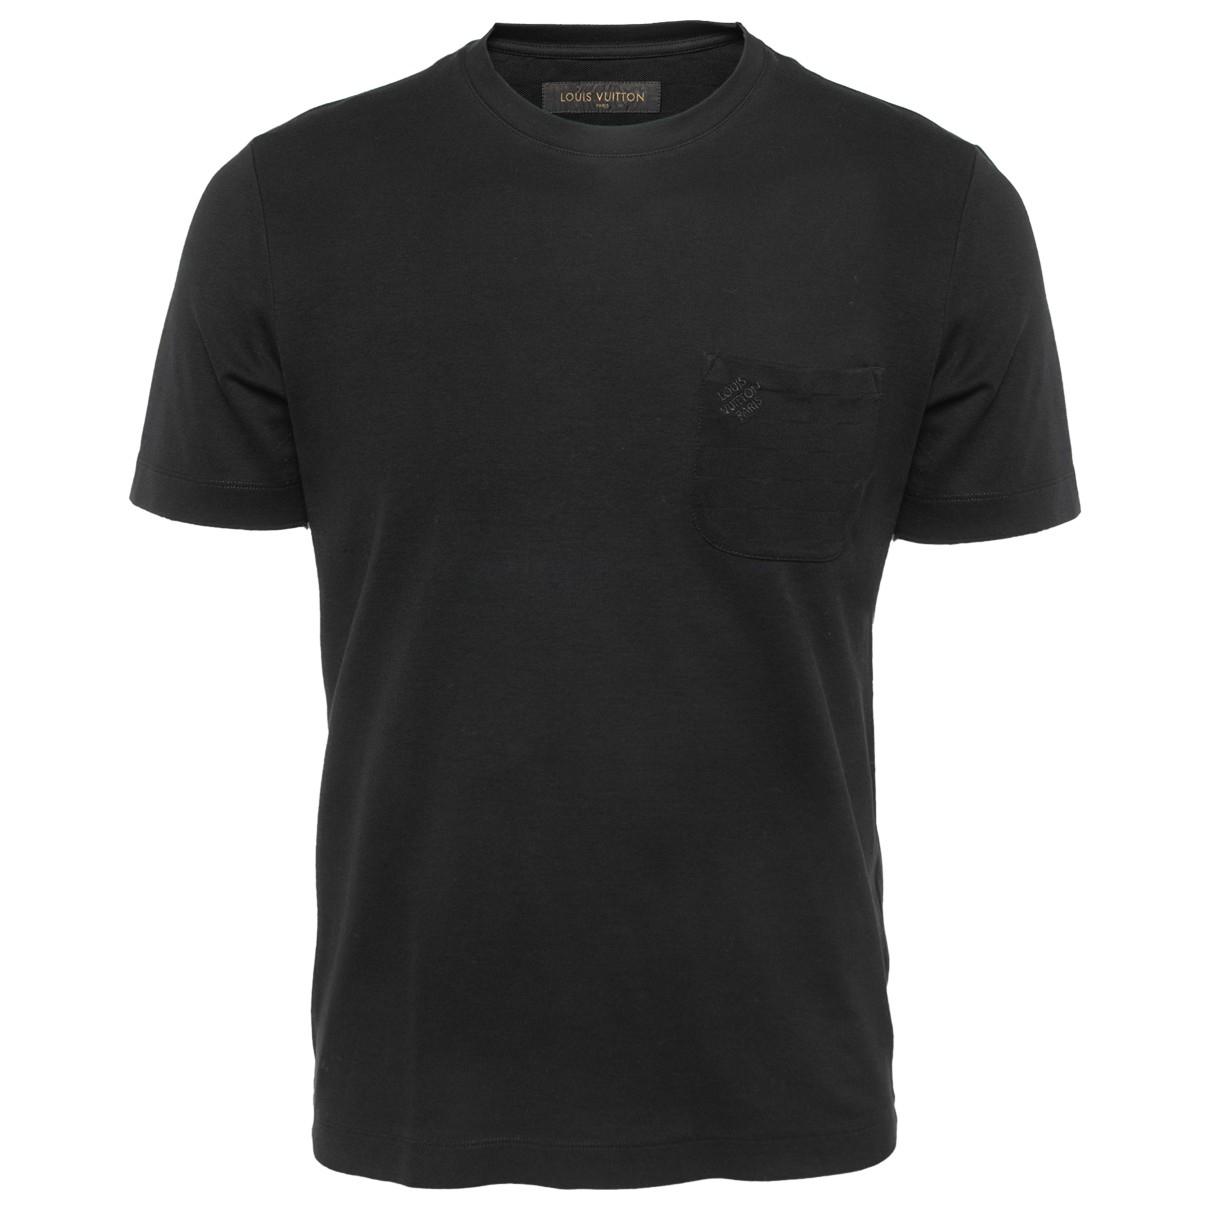 Louis Vuitton T-shirt for Men  Buy or Sell your LV T-shirts